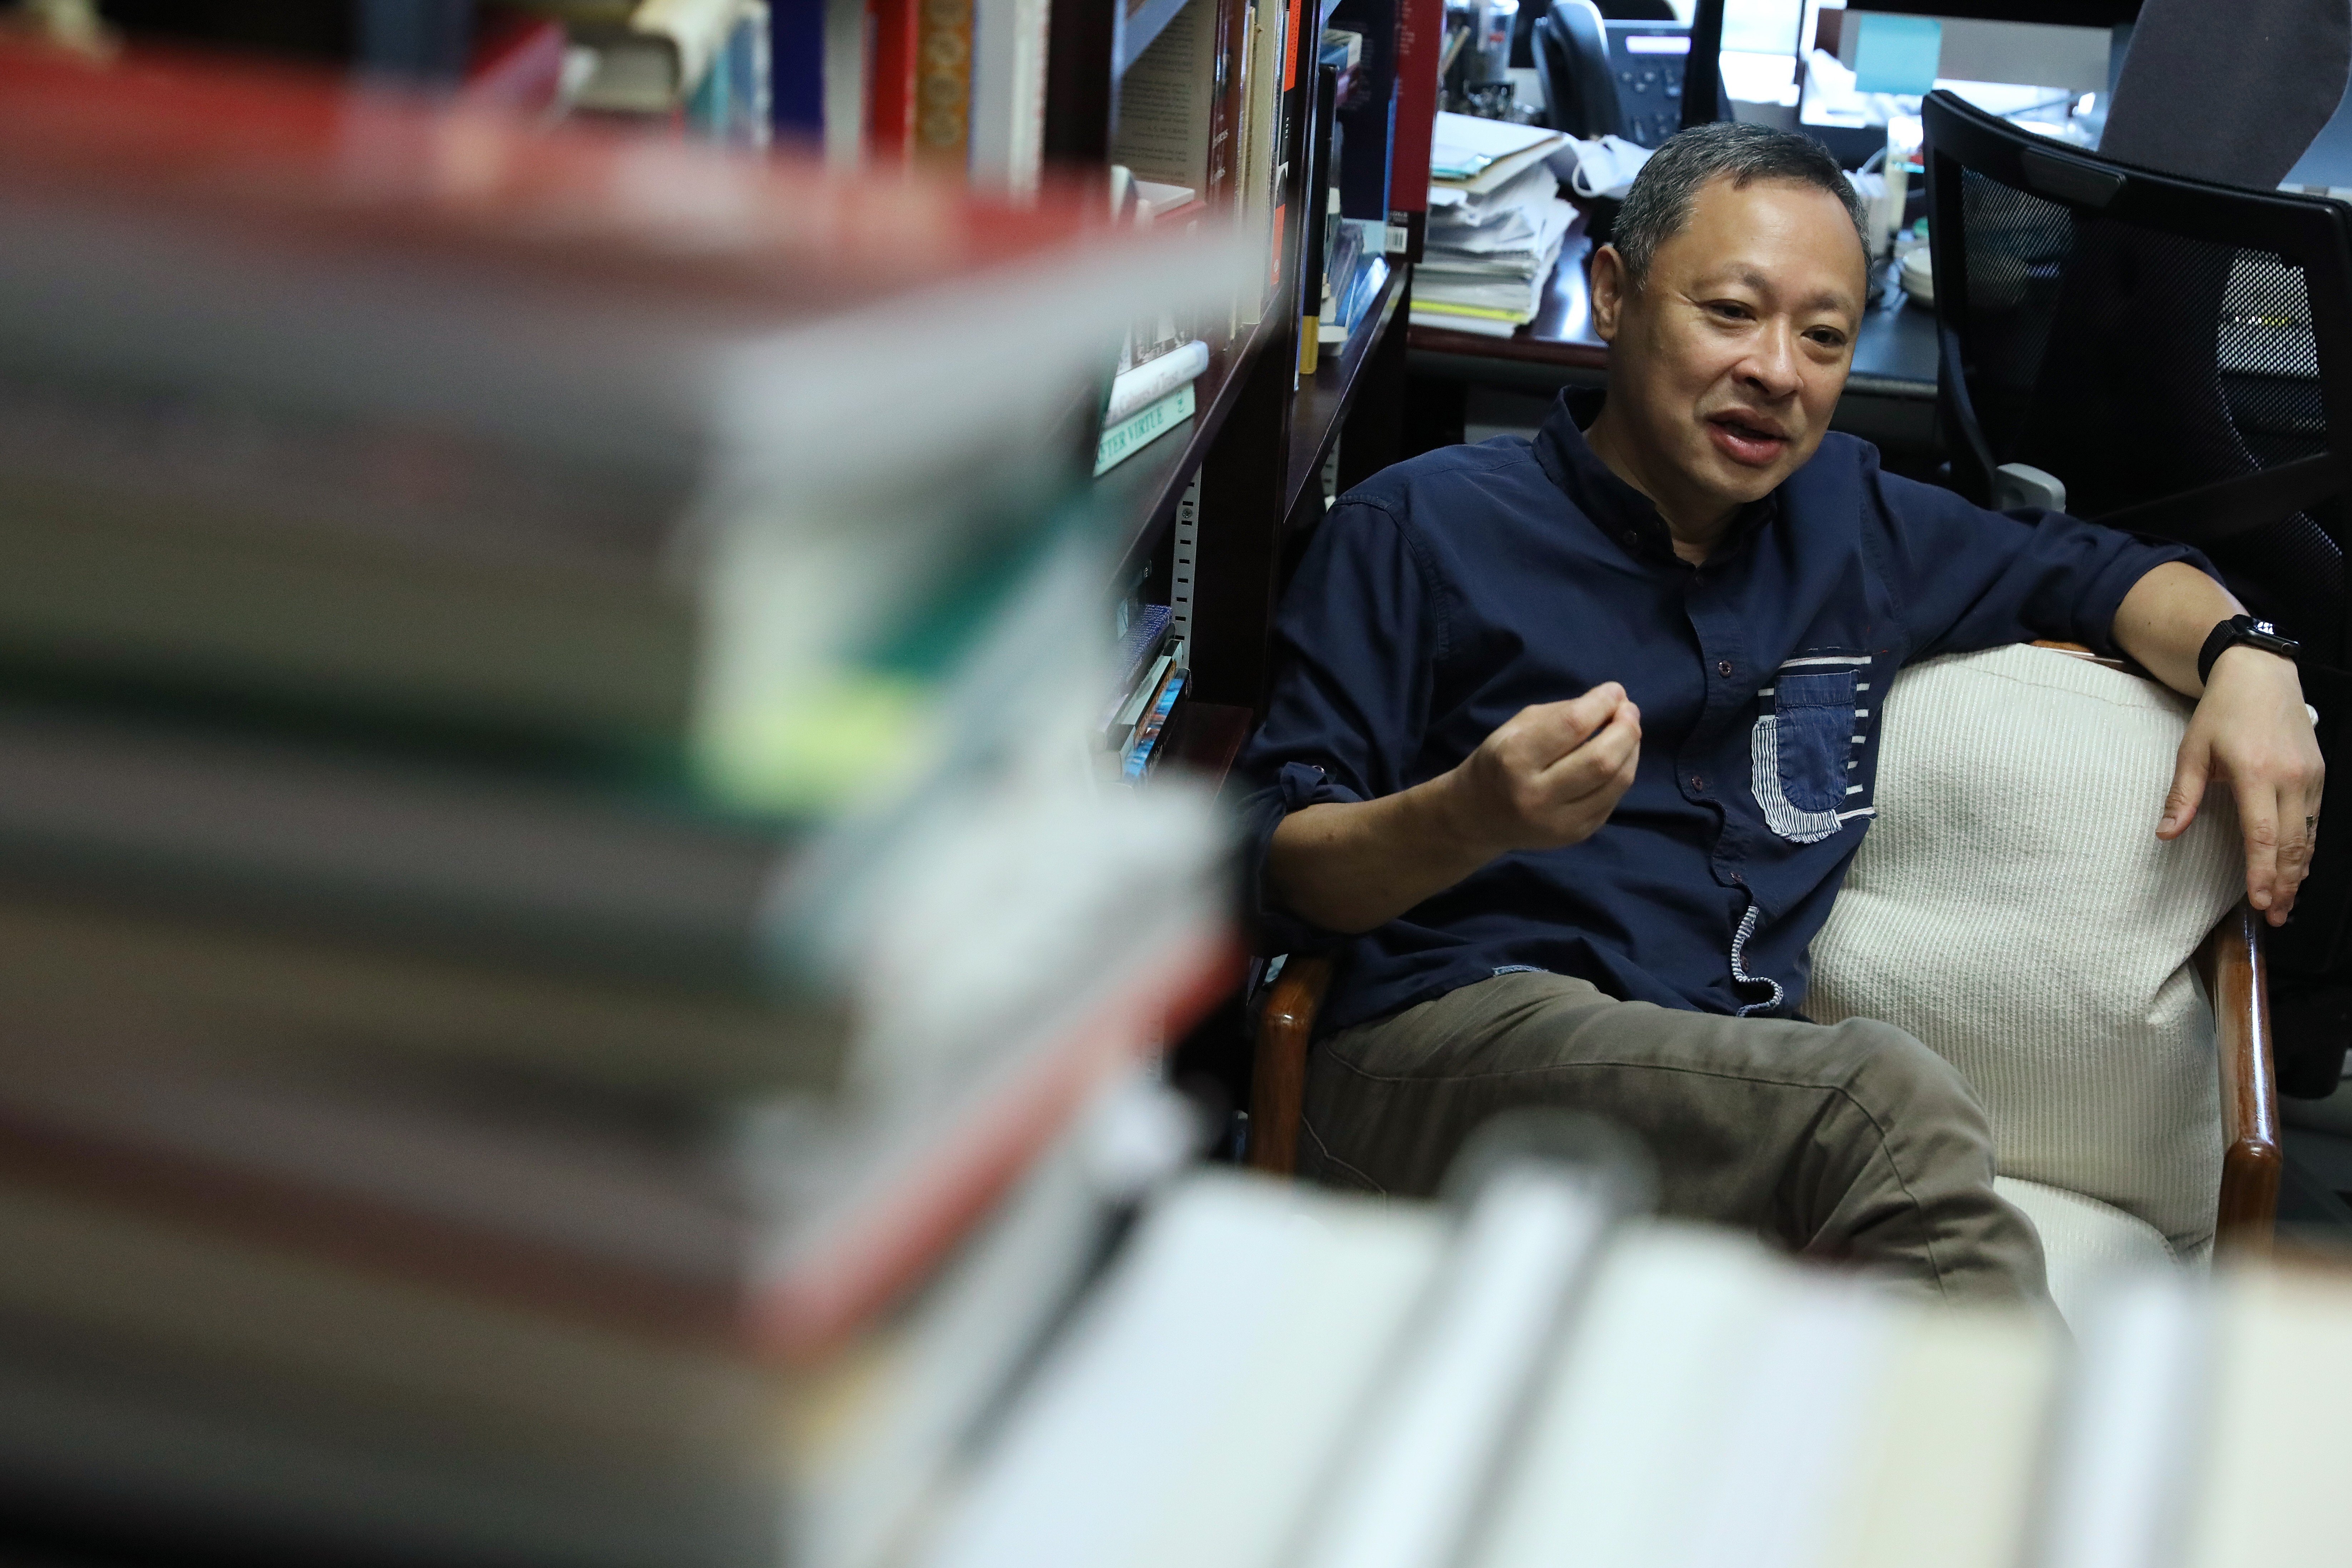 Activist Benny Tai was dismissed from his tenured position as associate professor of law at the University of Hong Kong late last month over convictions tied to the 2014 Occupy protests. Photo: Nora Tam